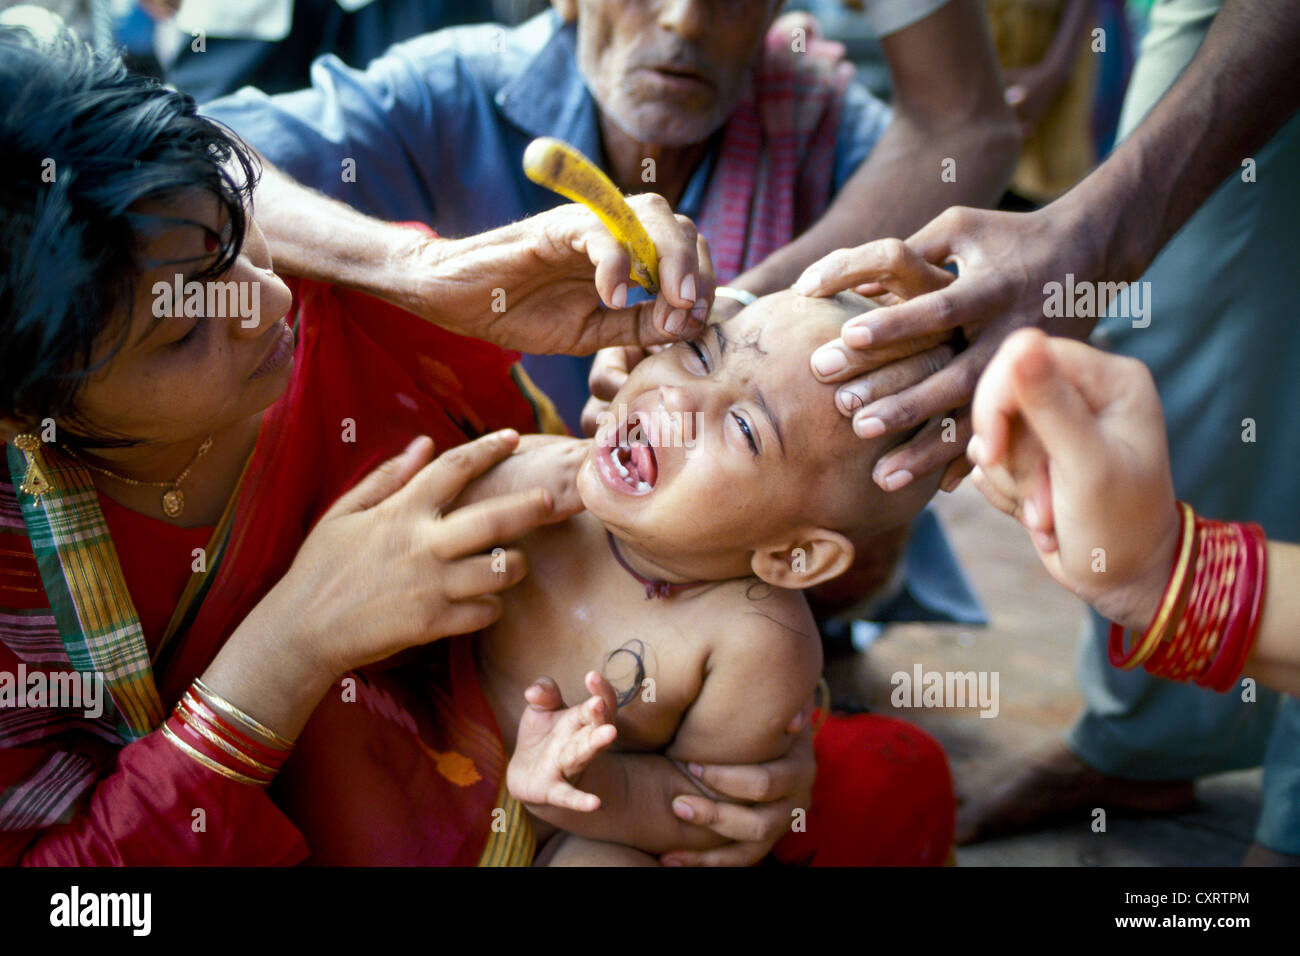 Keshdan ceremony, baby has hair shaved off which is later sacrificed in the temple in front of the Hindu temple fo Jagannath Stock Photo